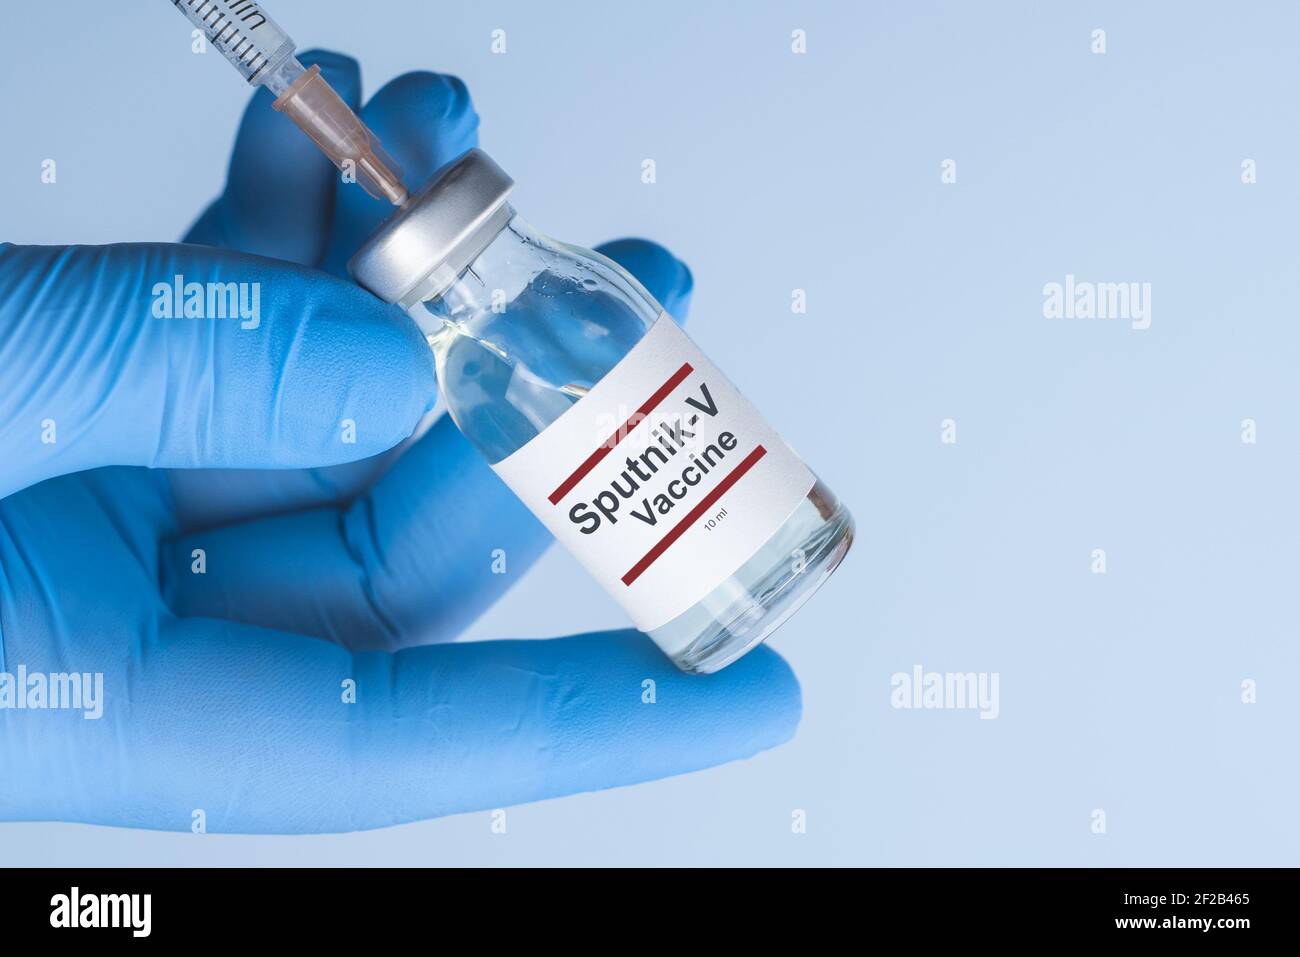 Coronavirus vaccine concept and background. New vaccine sputnik-v isolated on blue background. Covid-19, 2019-nCov pandemic. Stock Photo